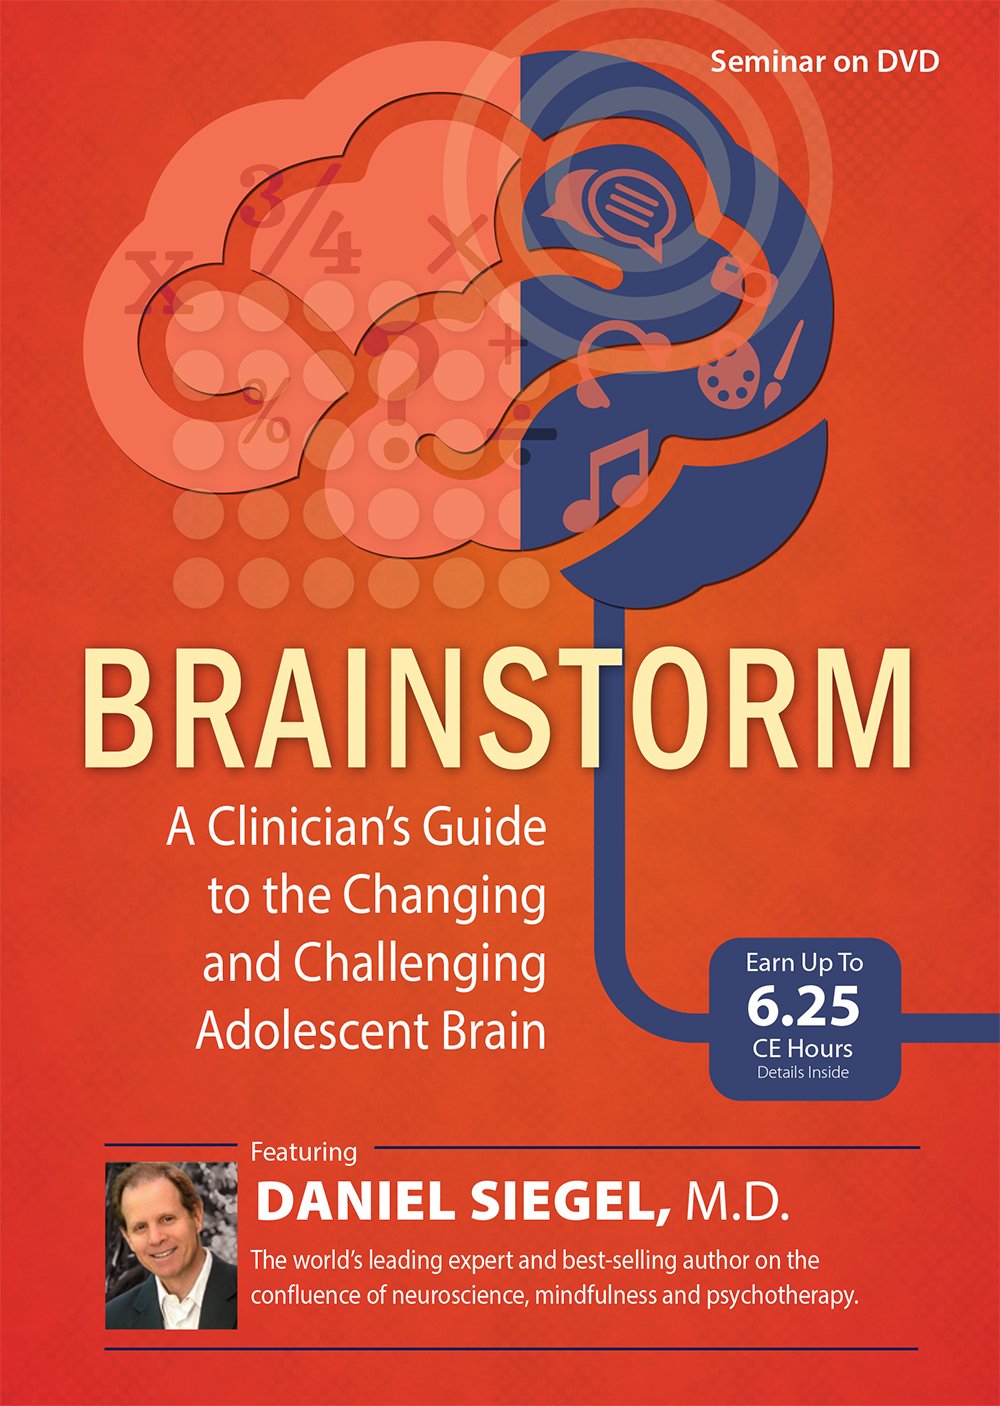 /images/uploaded/1019/Daniel J. Siegel - Brainstorm, A Clinician's Guide to the Changing and Challenging Adolescent Brain.jpg